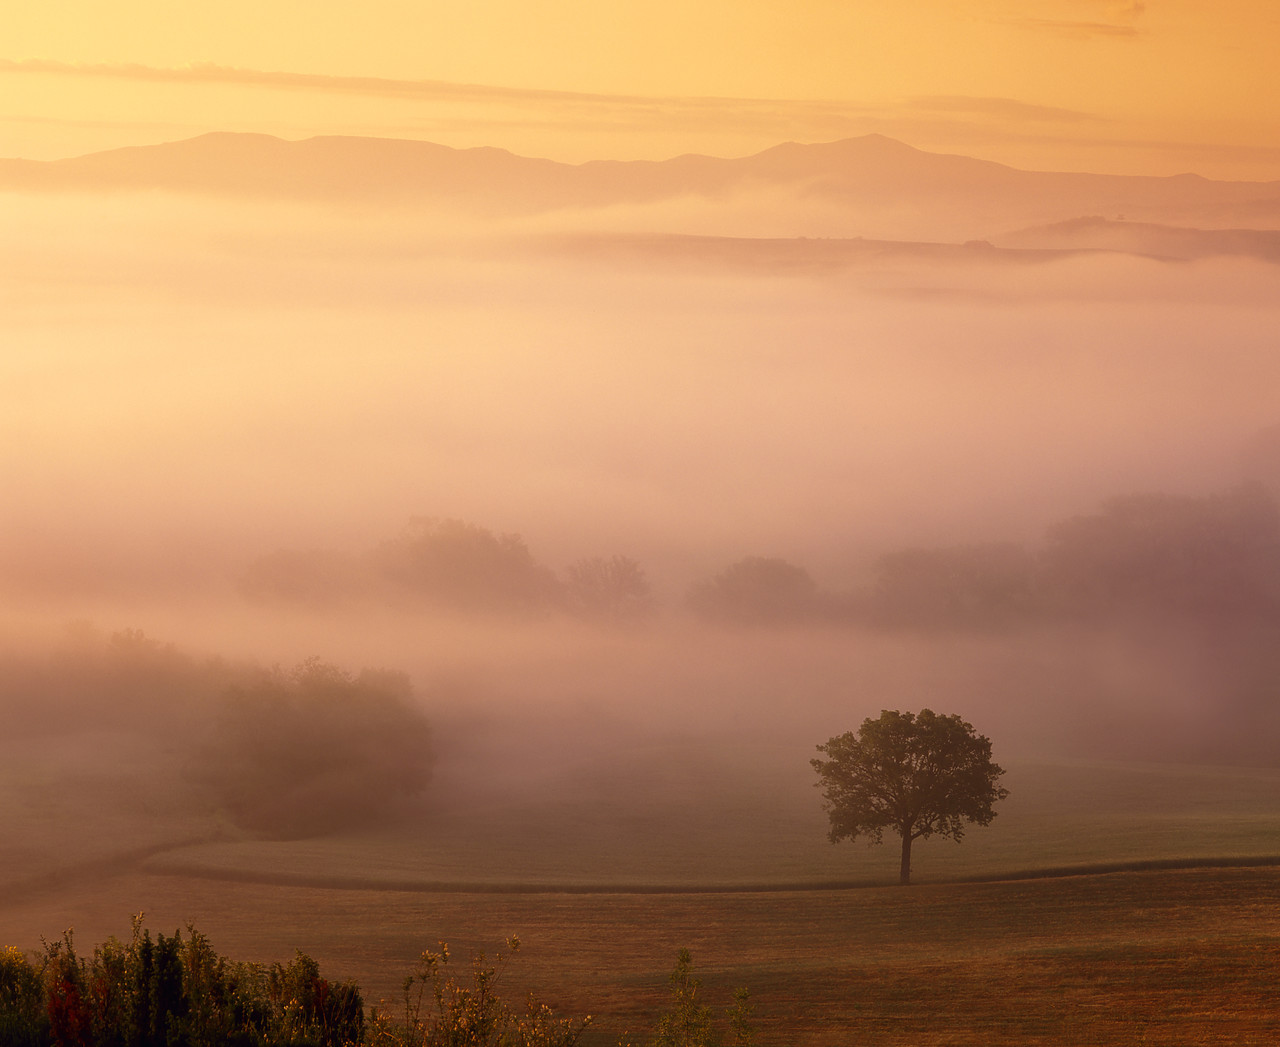 #020143-1 - Tree in Morning Mist, San Quirico d'Orcia, Tuscany, Italy